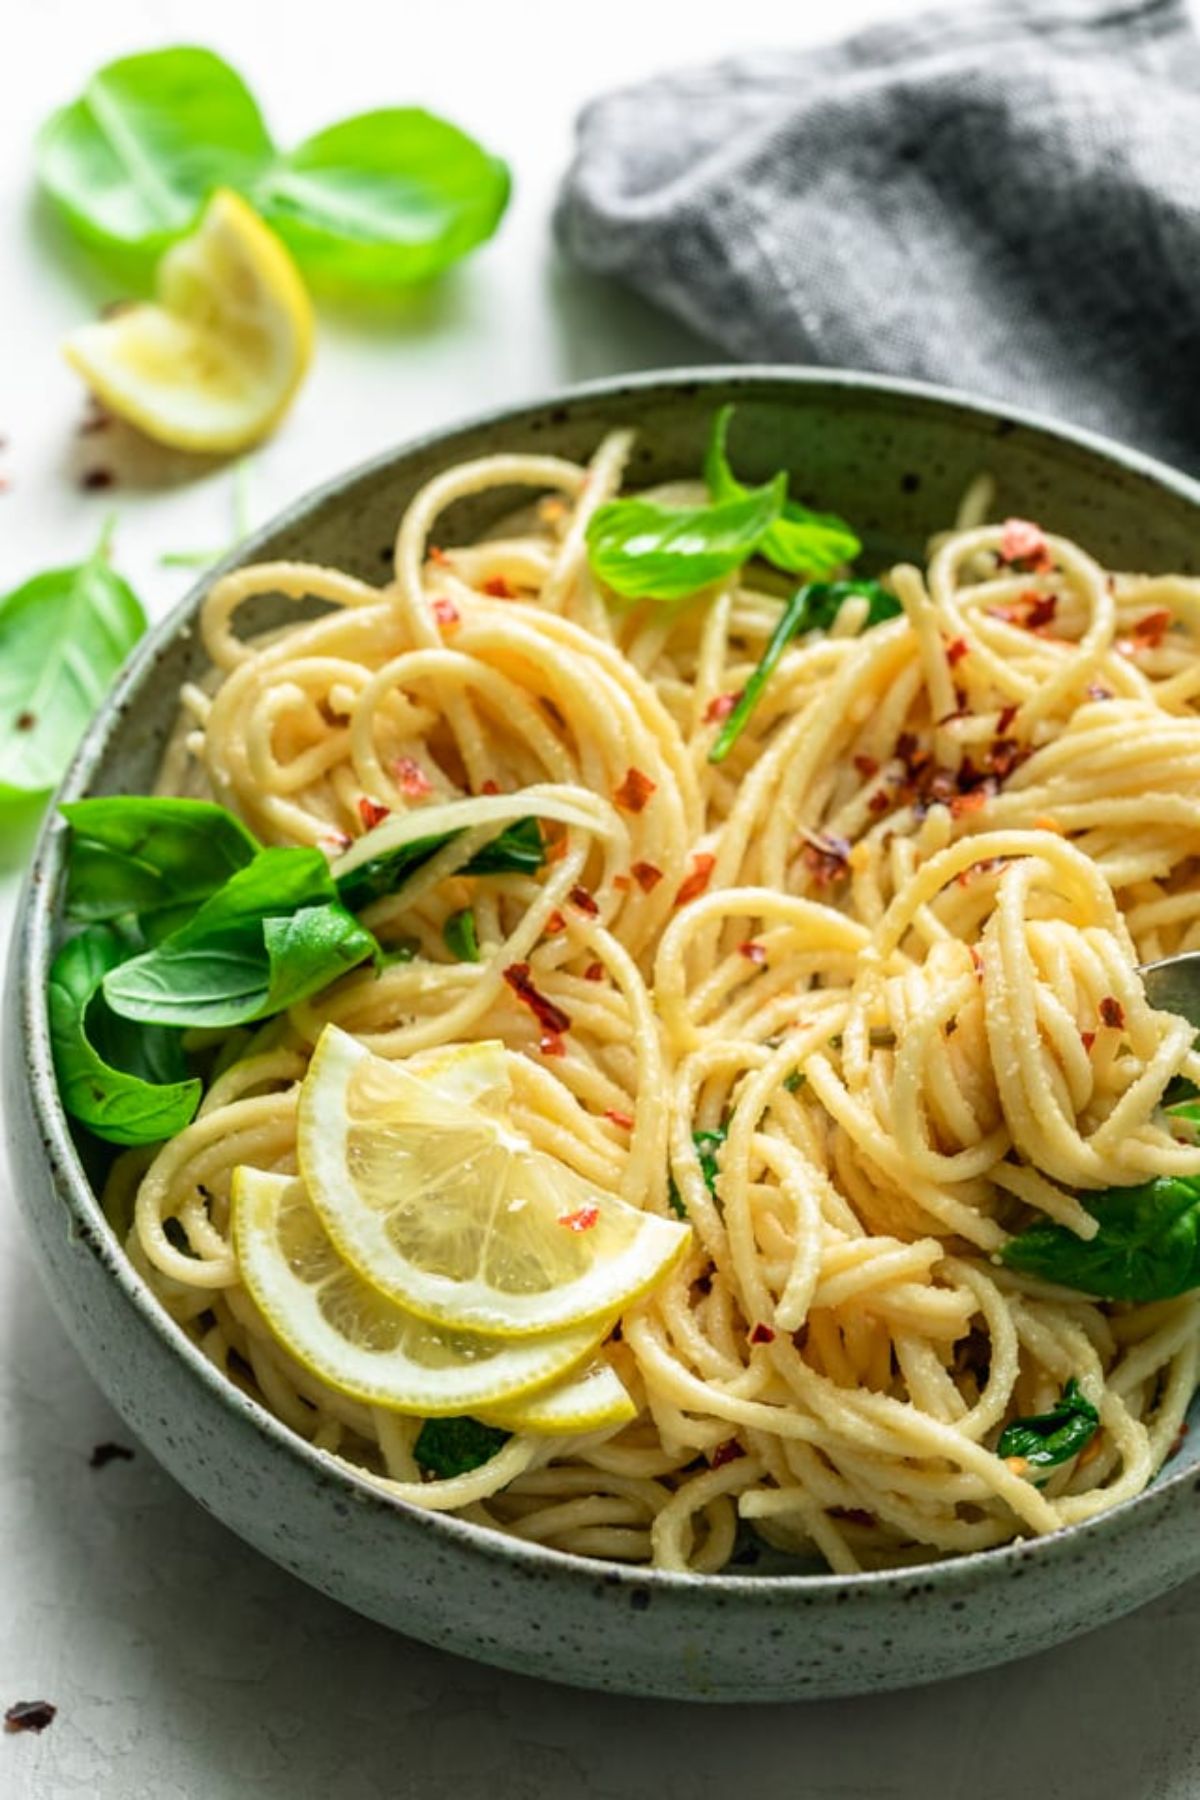 Mediterranean hummus linguine topped with chilli flakes and fresh basil